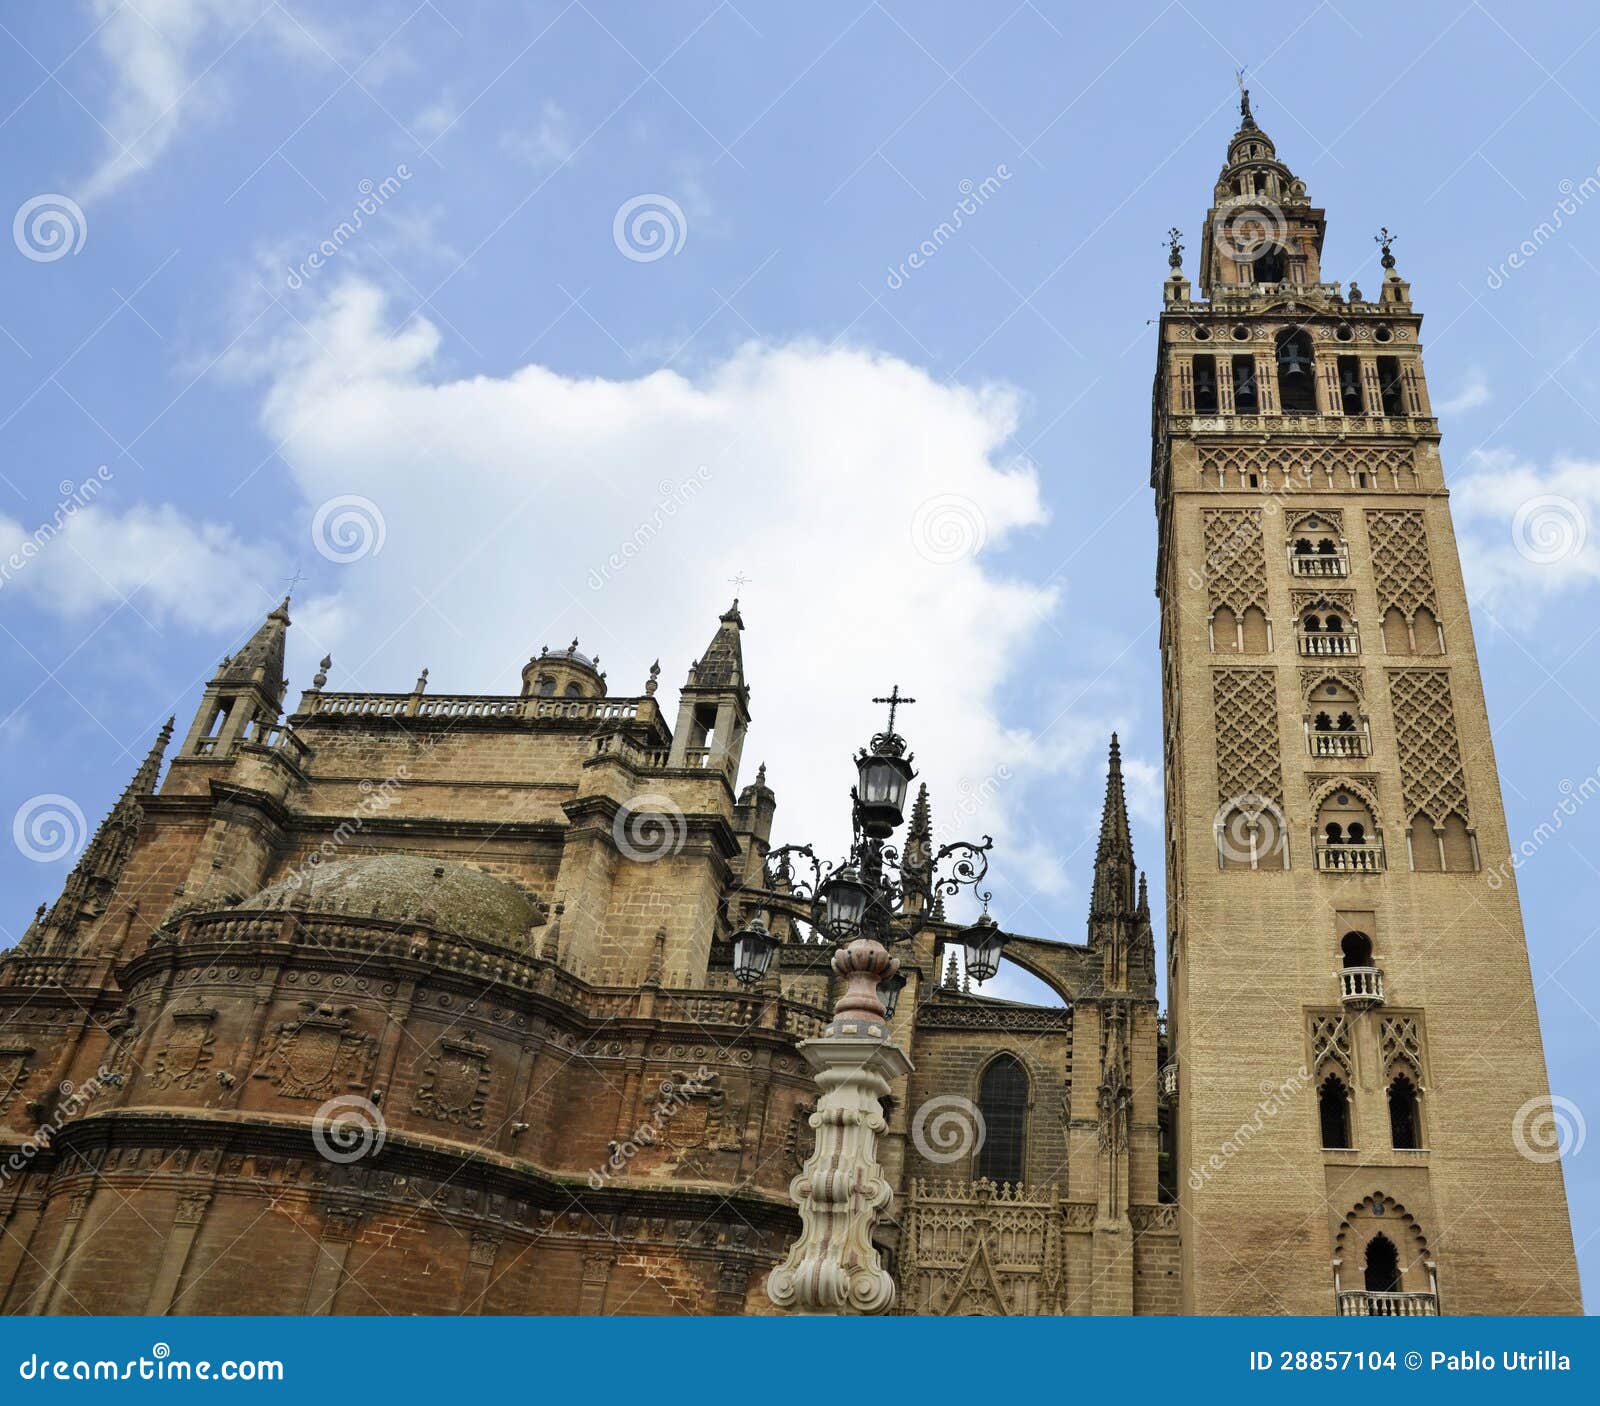 seville cathedral and giralda tower